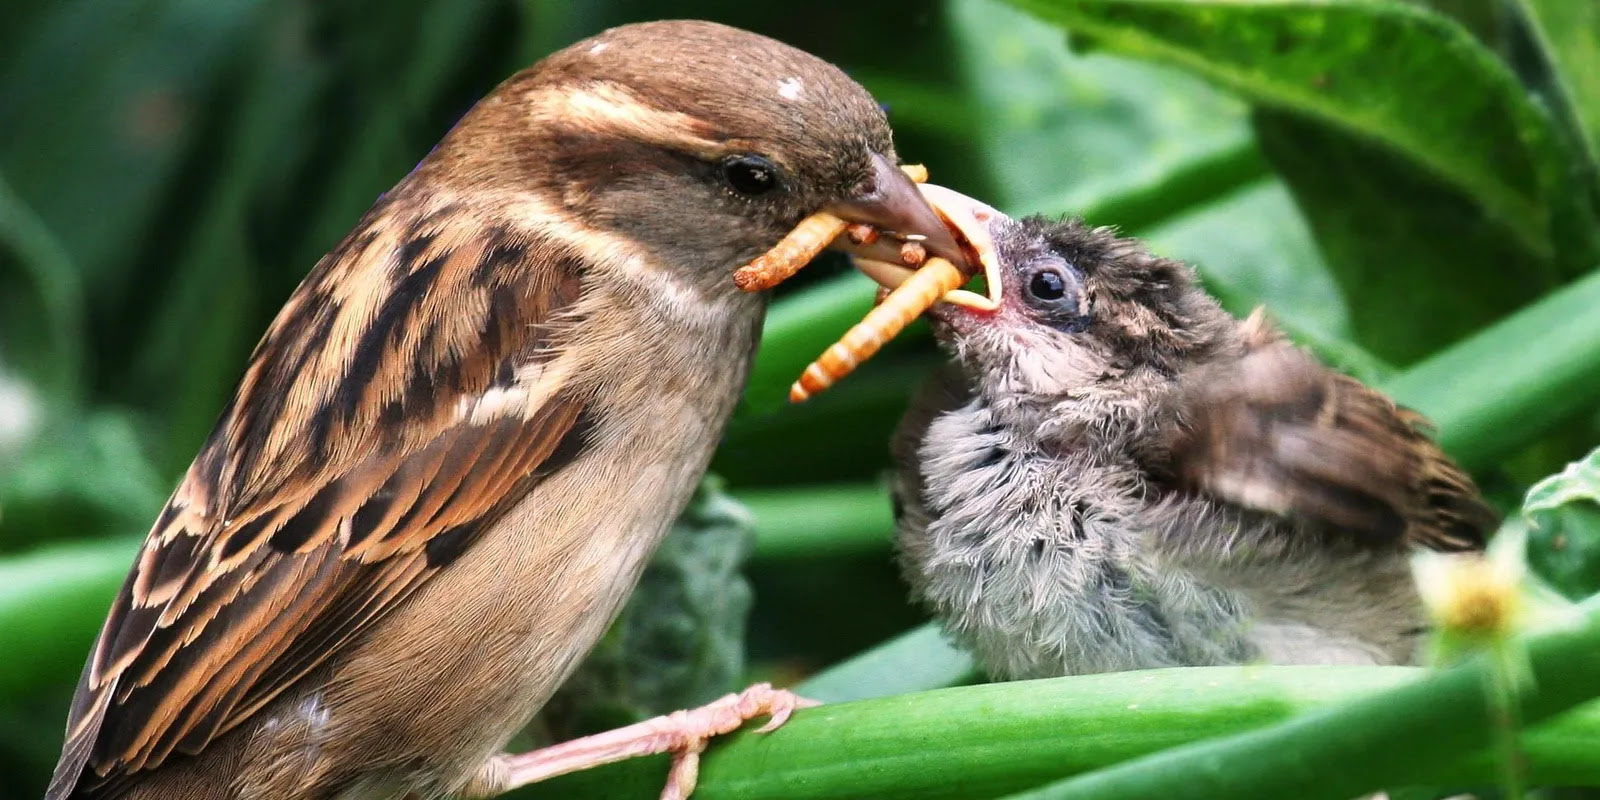 What Insects Do Baby Birds Eat